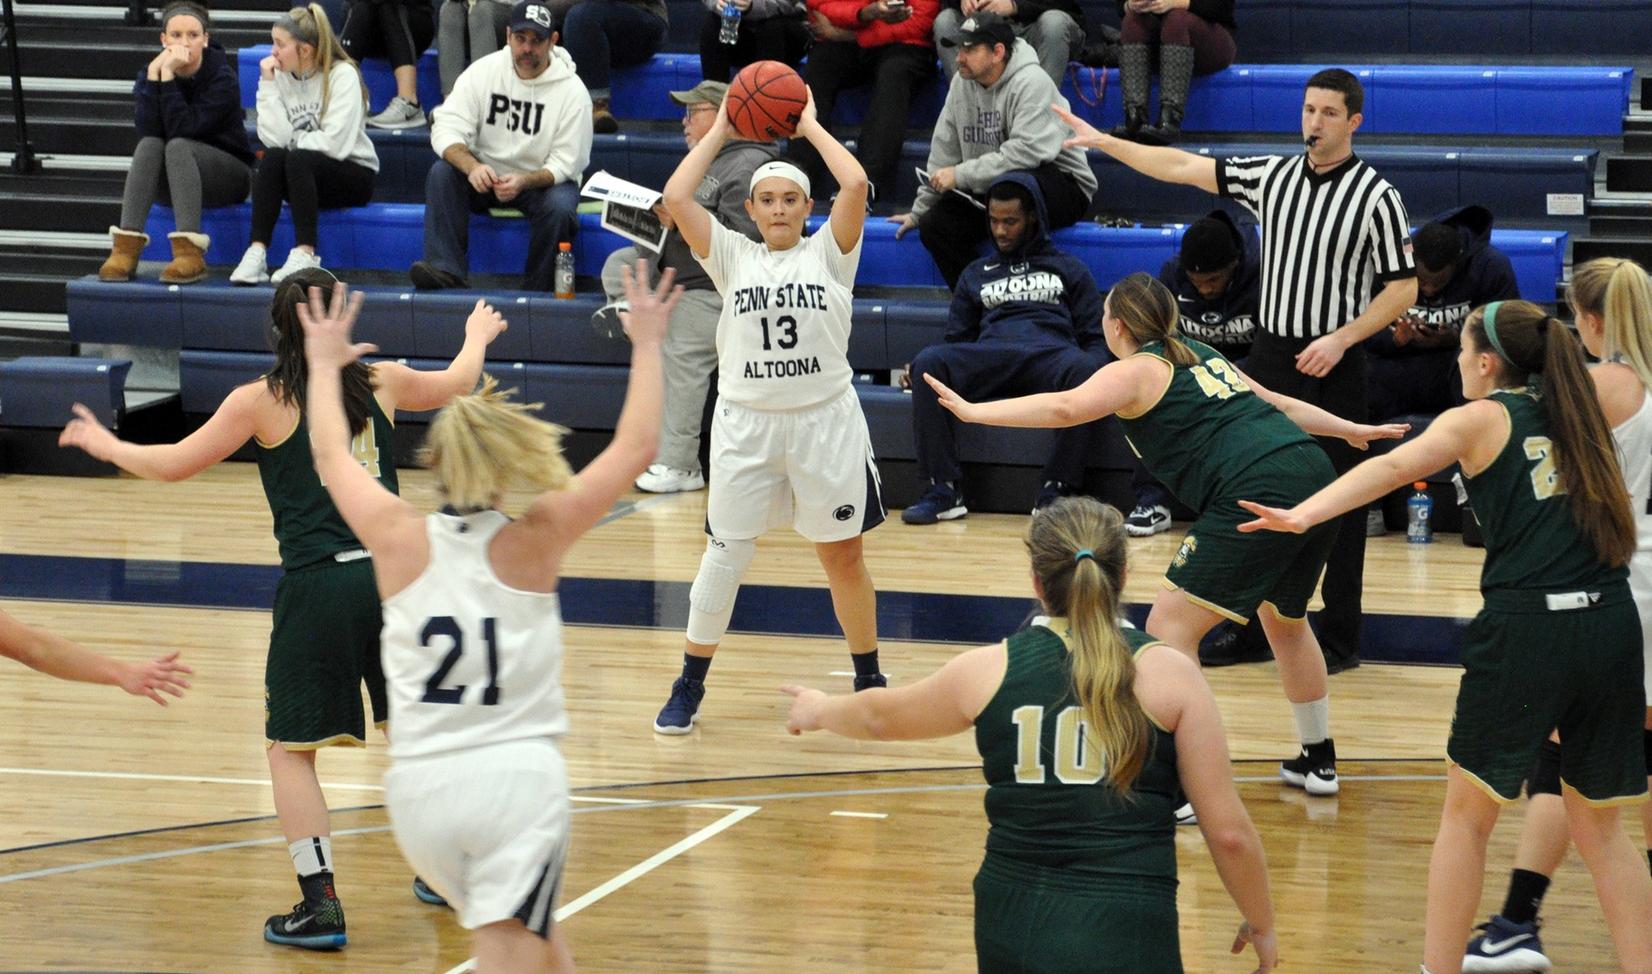 Big Second Half Pushes Lady Lions Past Franciscan 83-58